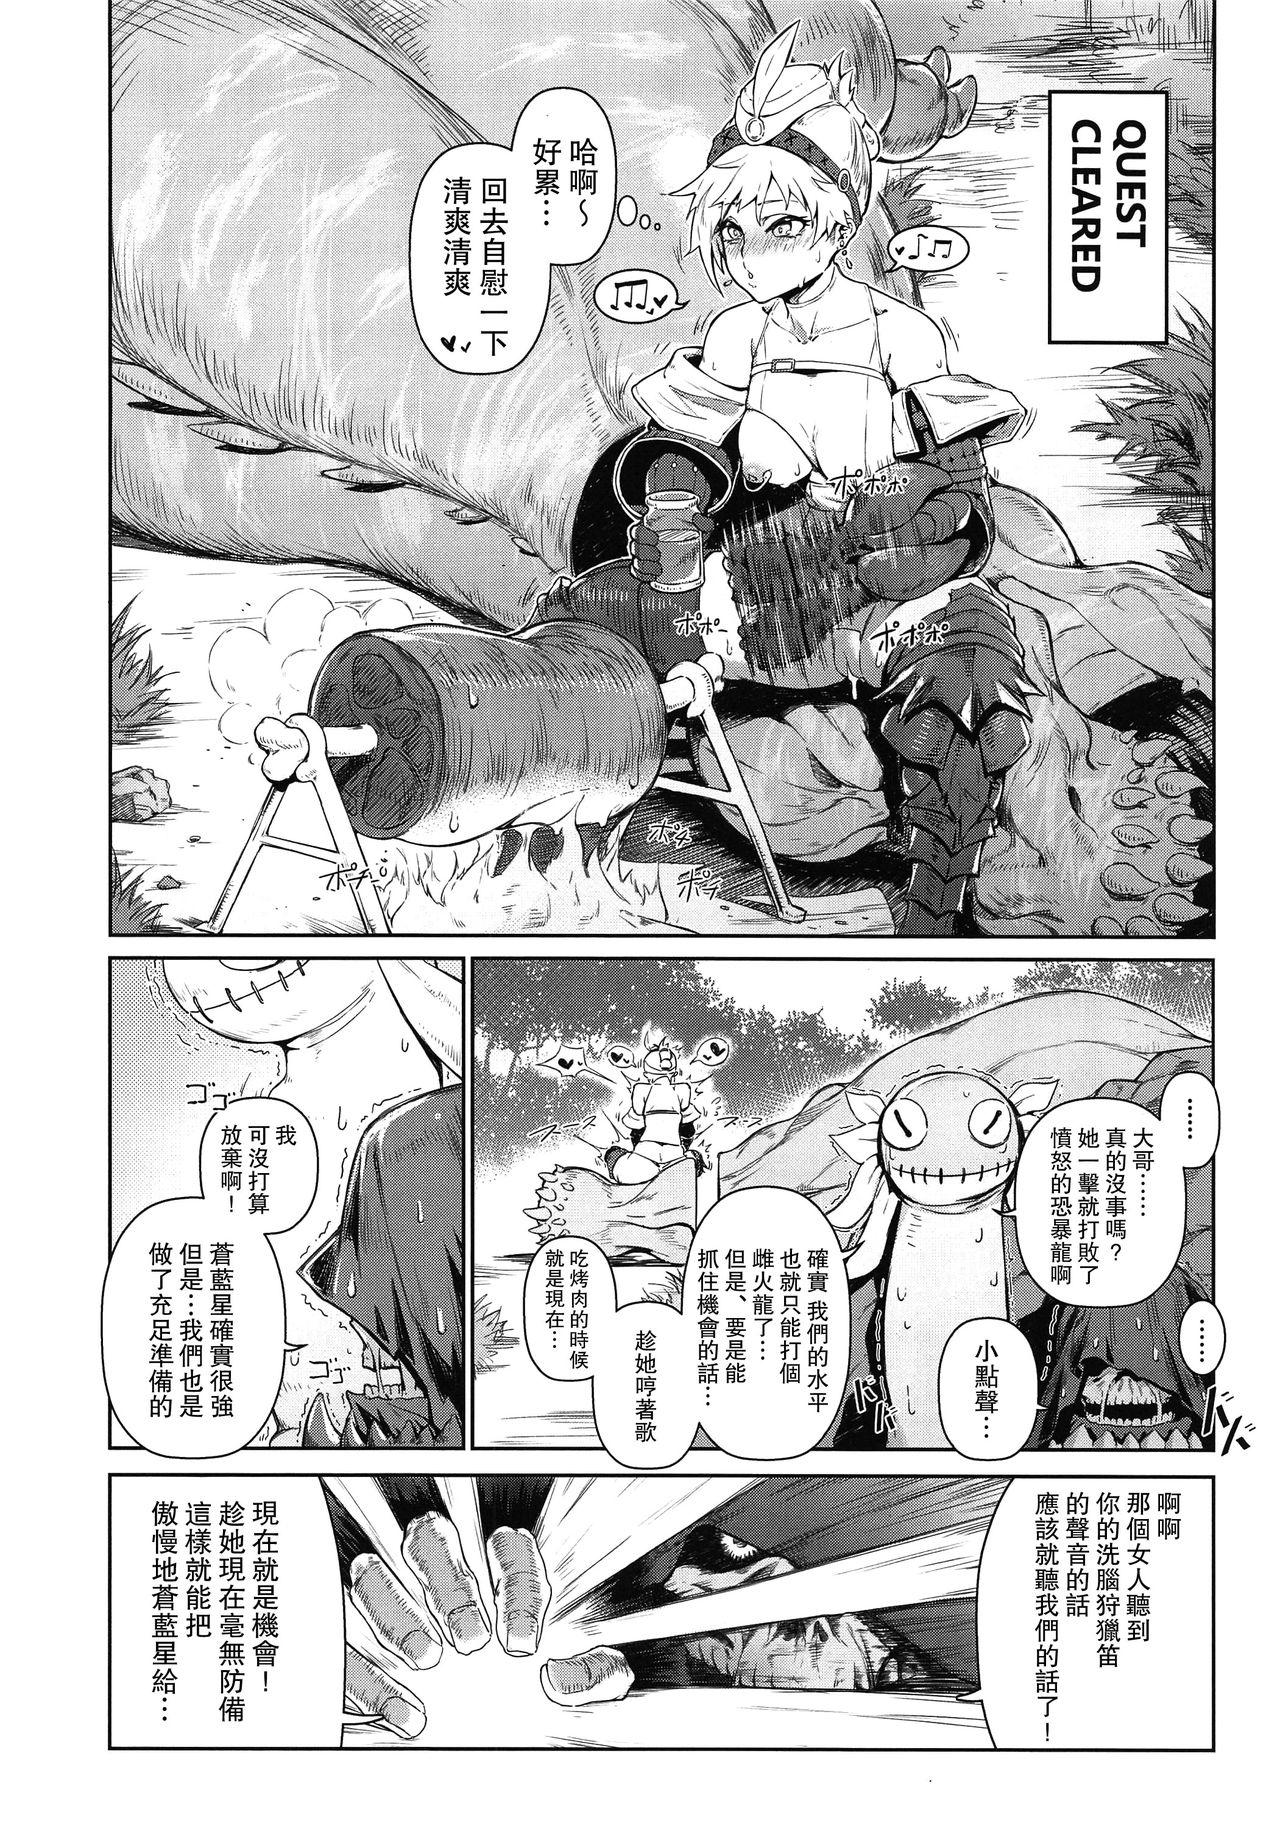 Asian Extreme Anal Hunter - Monster hunter Spy - Page 6